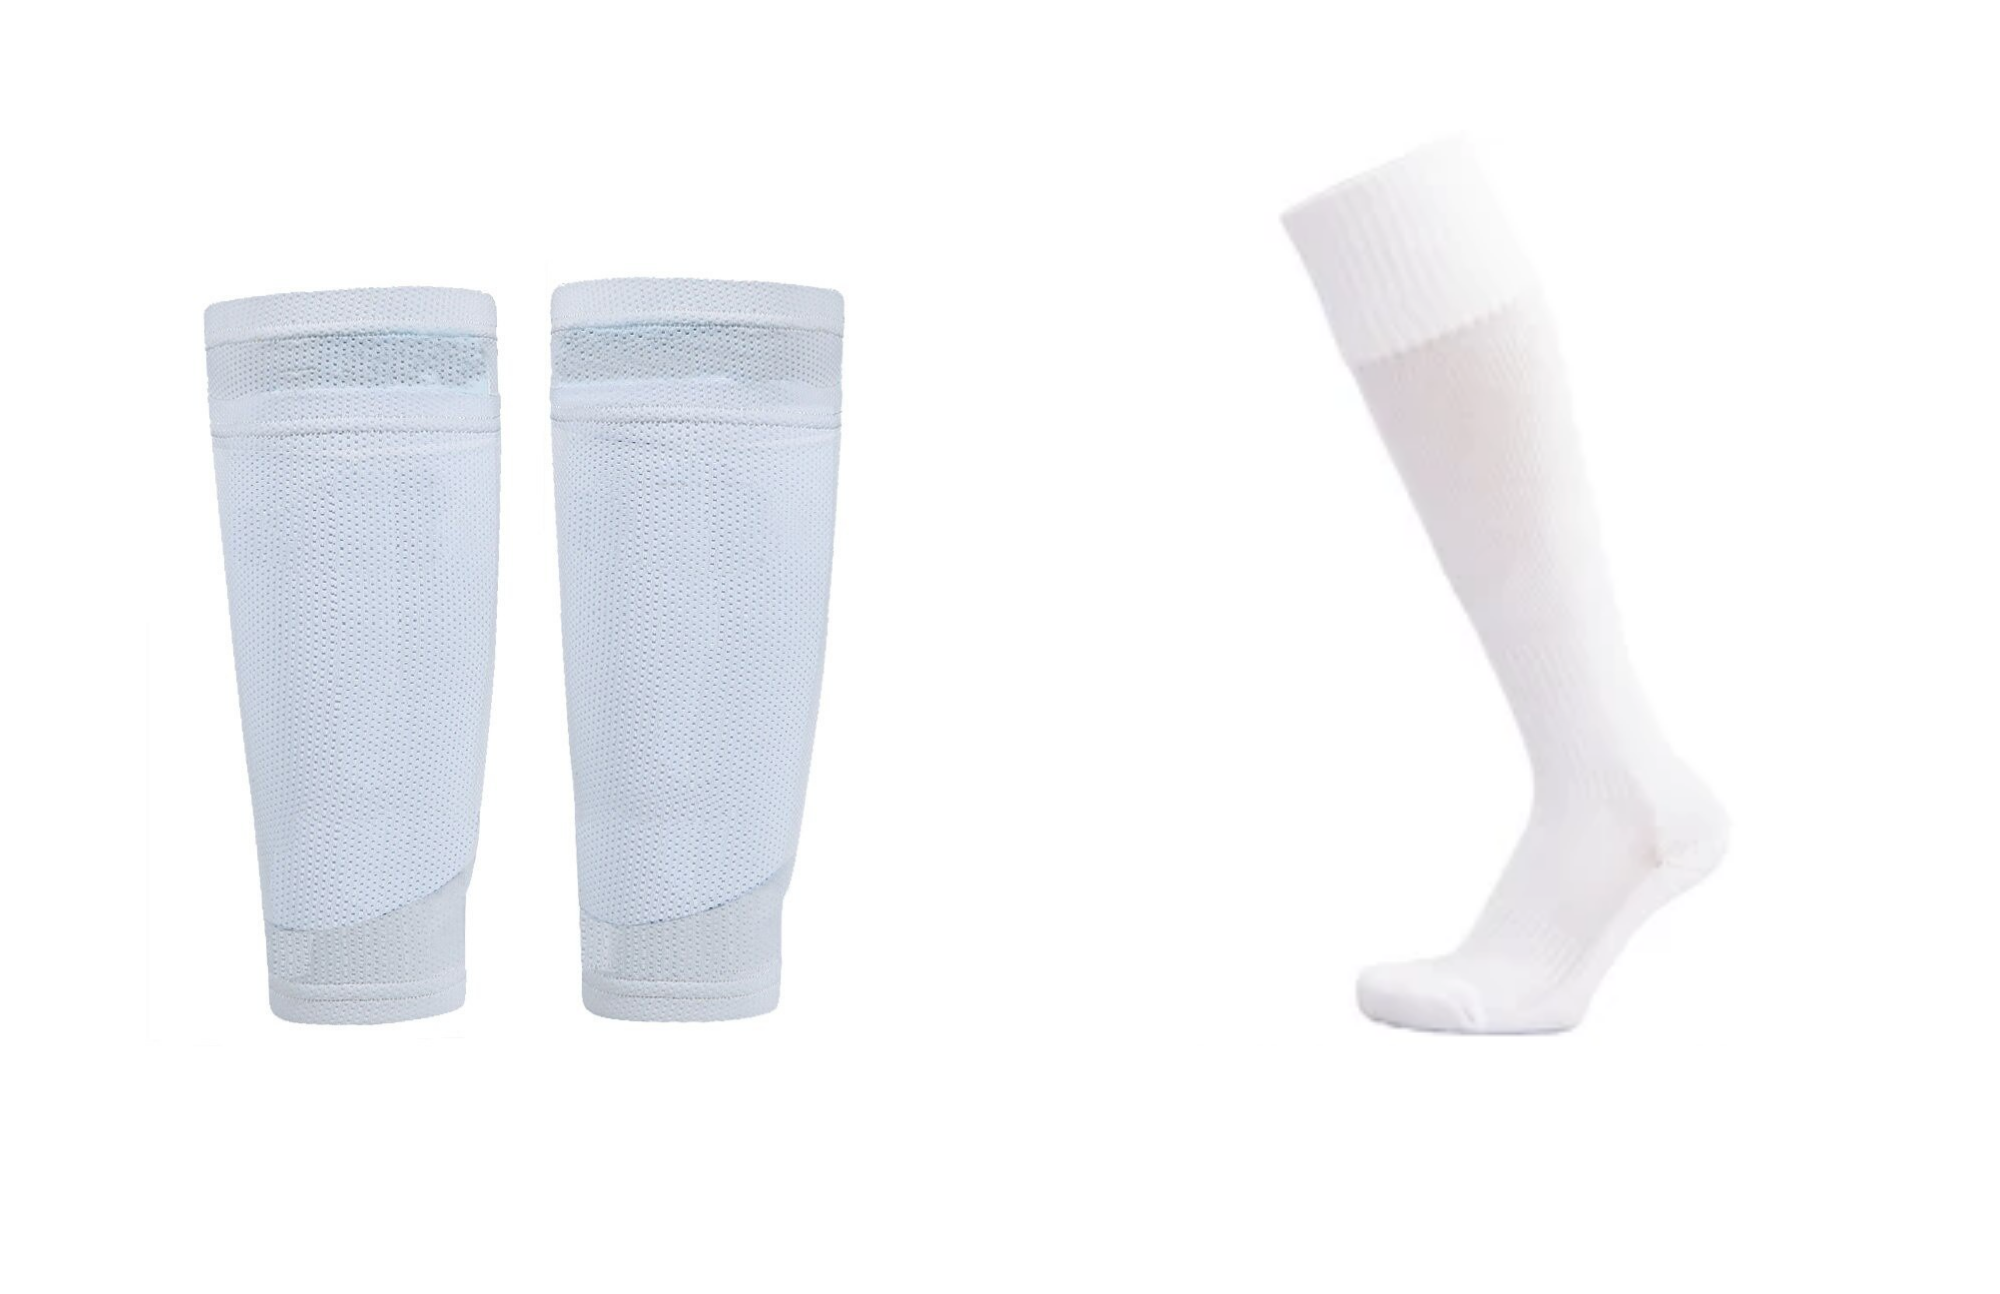 Plain pair of shin guards and a sock